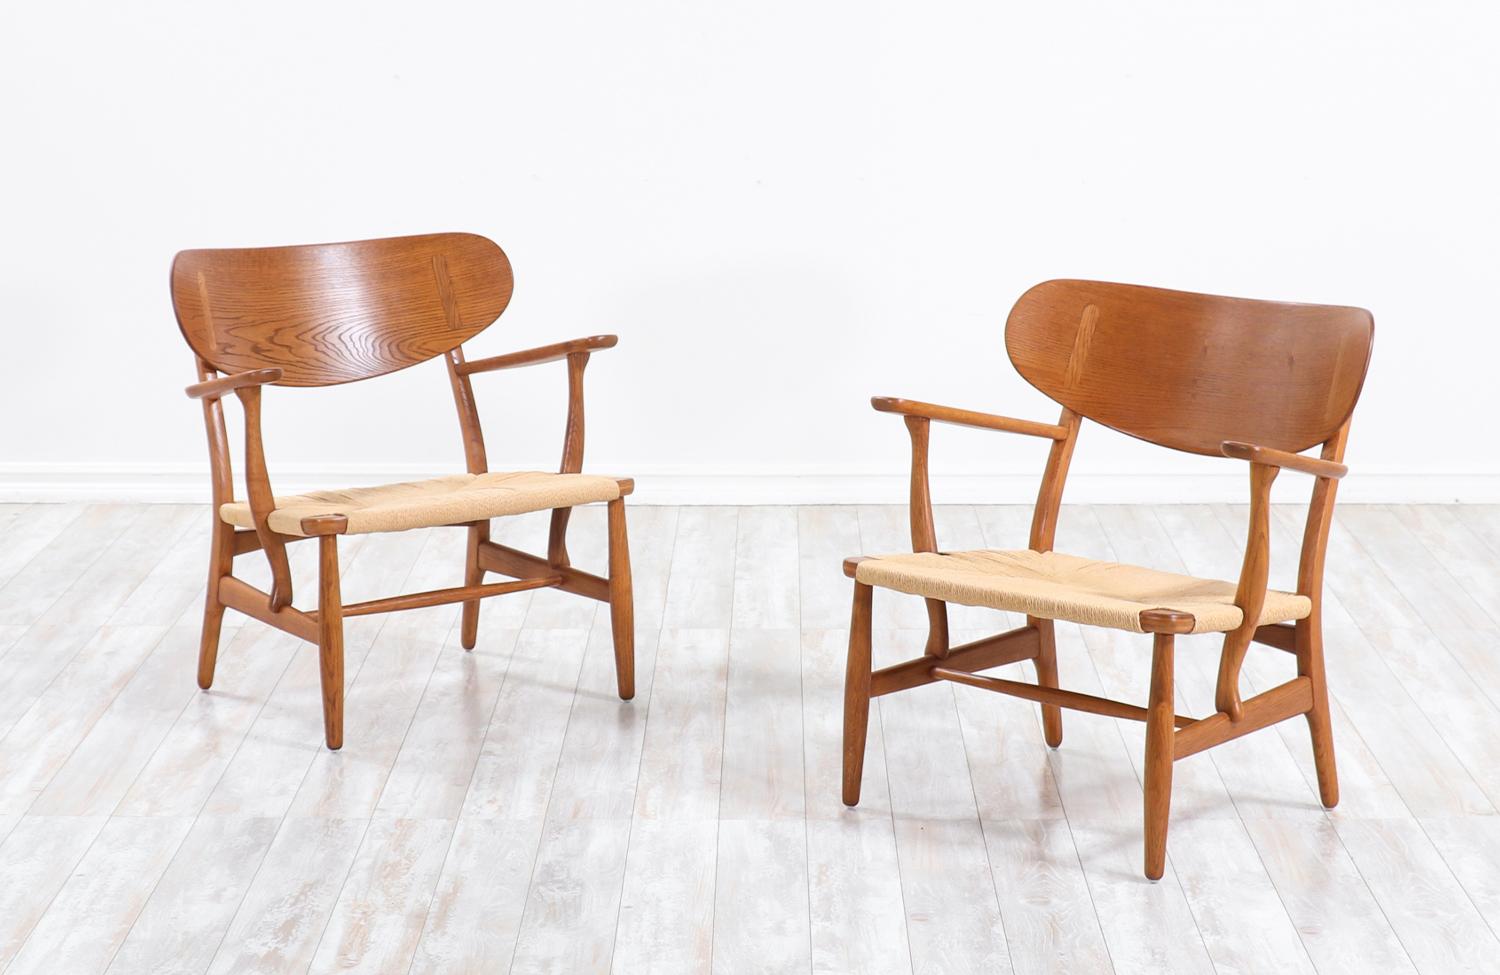 A pair of iconic CH-22 lounge chairs designed by Hans J. Wegner in collaboration with the famous workshop of Carl Hansen & Søn in Denmark during the 1950s. Our chairs feature large molded curbed backrests for optimum comfort that feel as if they hug